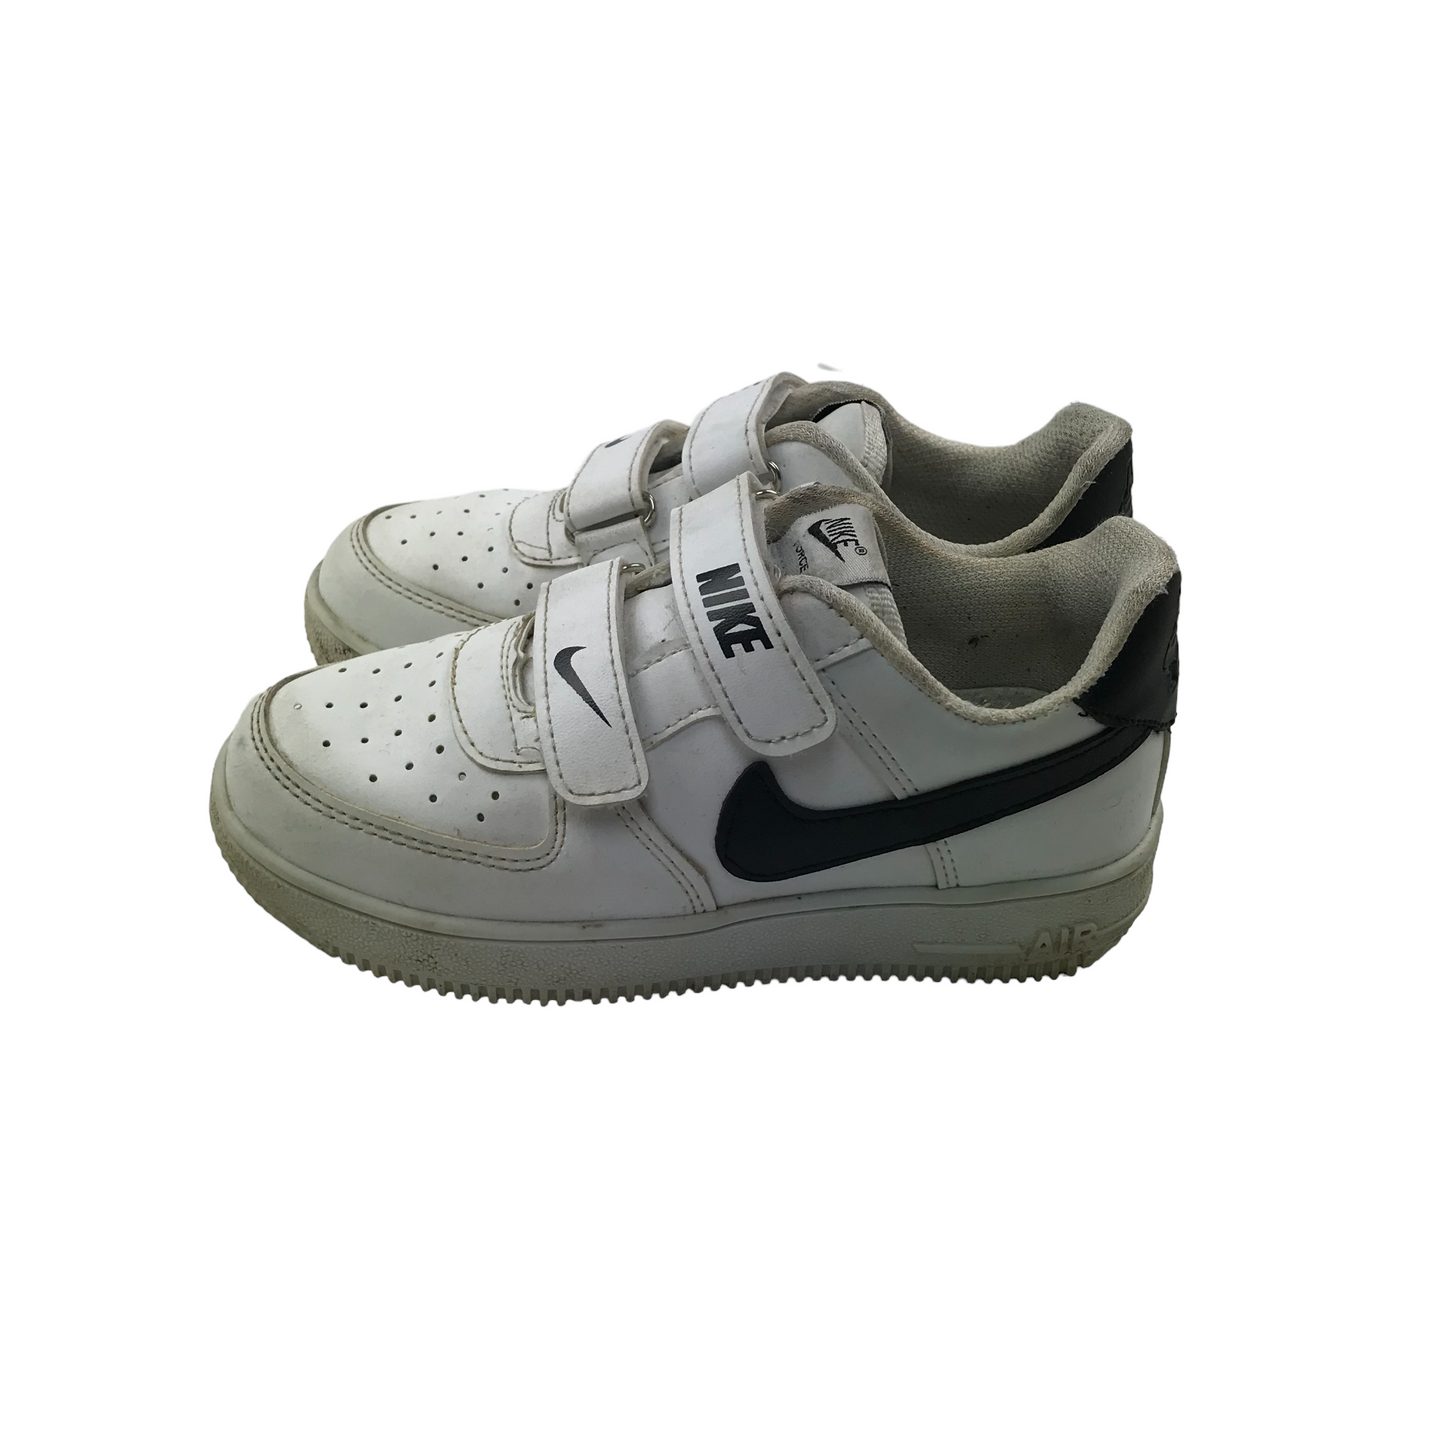 Nike Force 1 White Trainers Shoe Size 12 junior